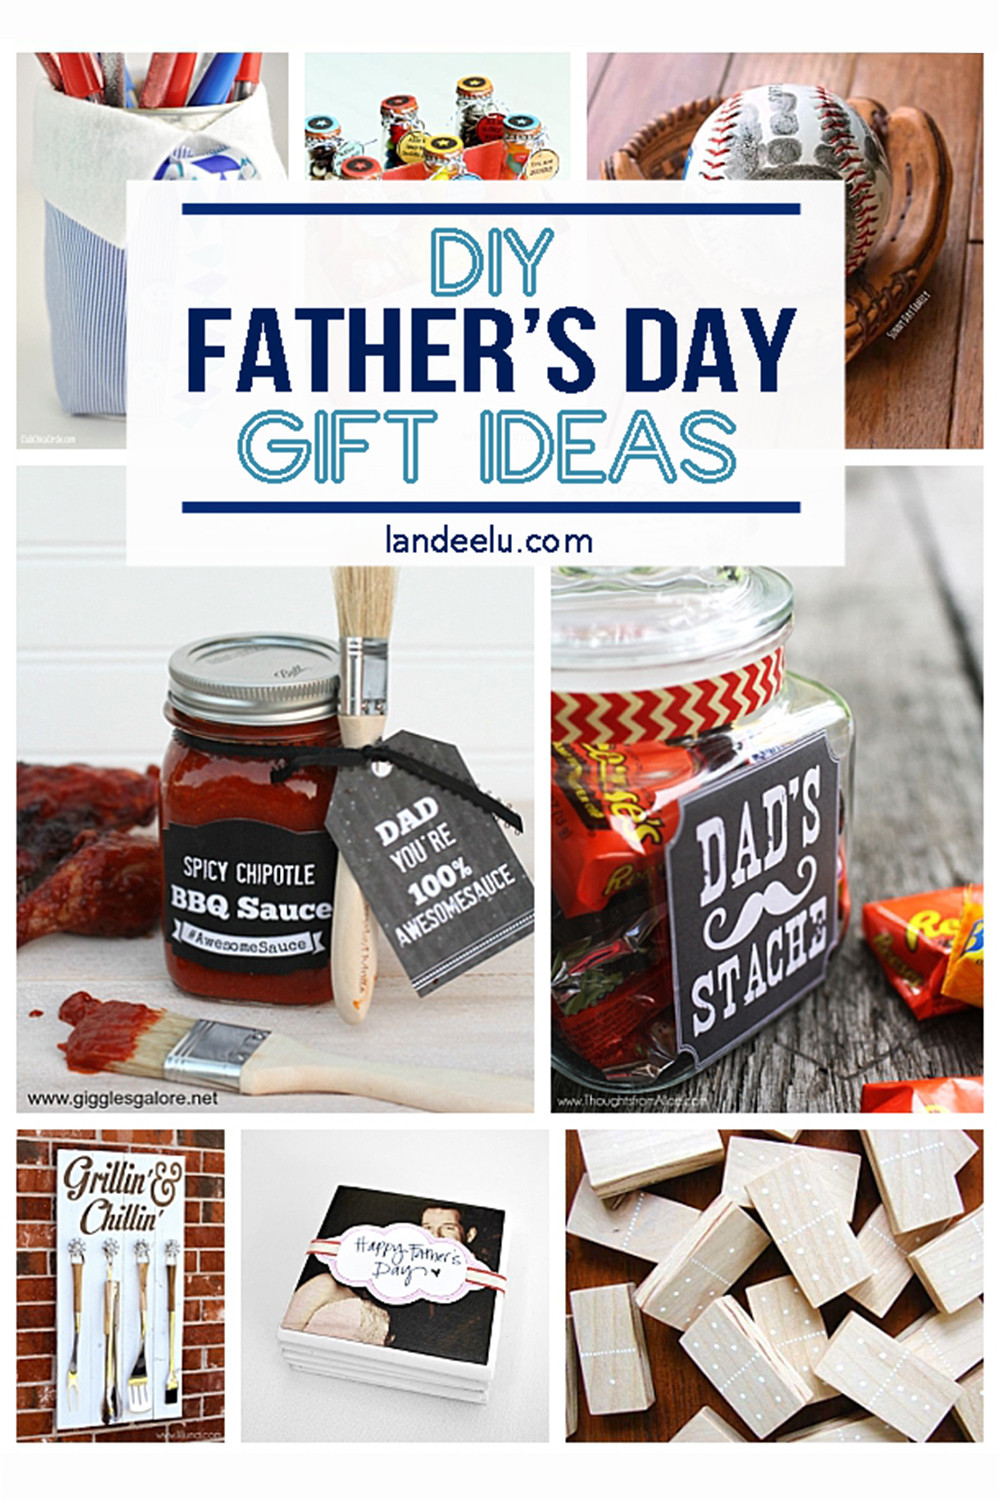 Fathers Day Gift Ideas Diy
 21 DIY Father s Day Gifts to Celebrate Dad landeelu